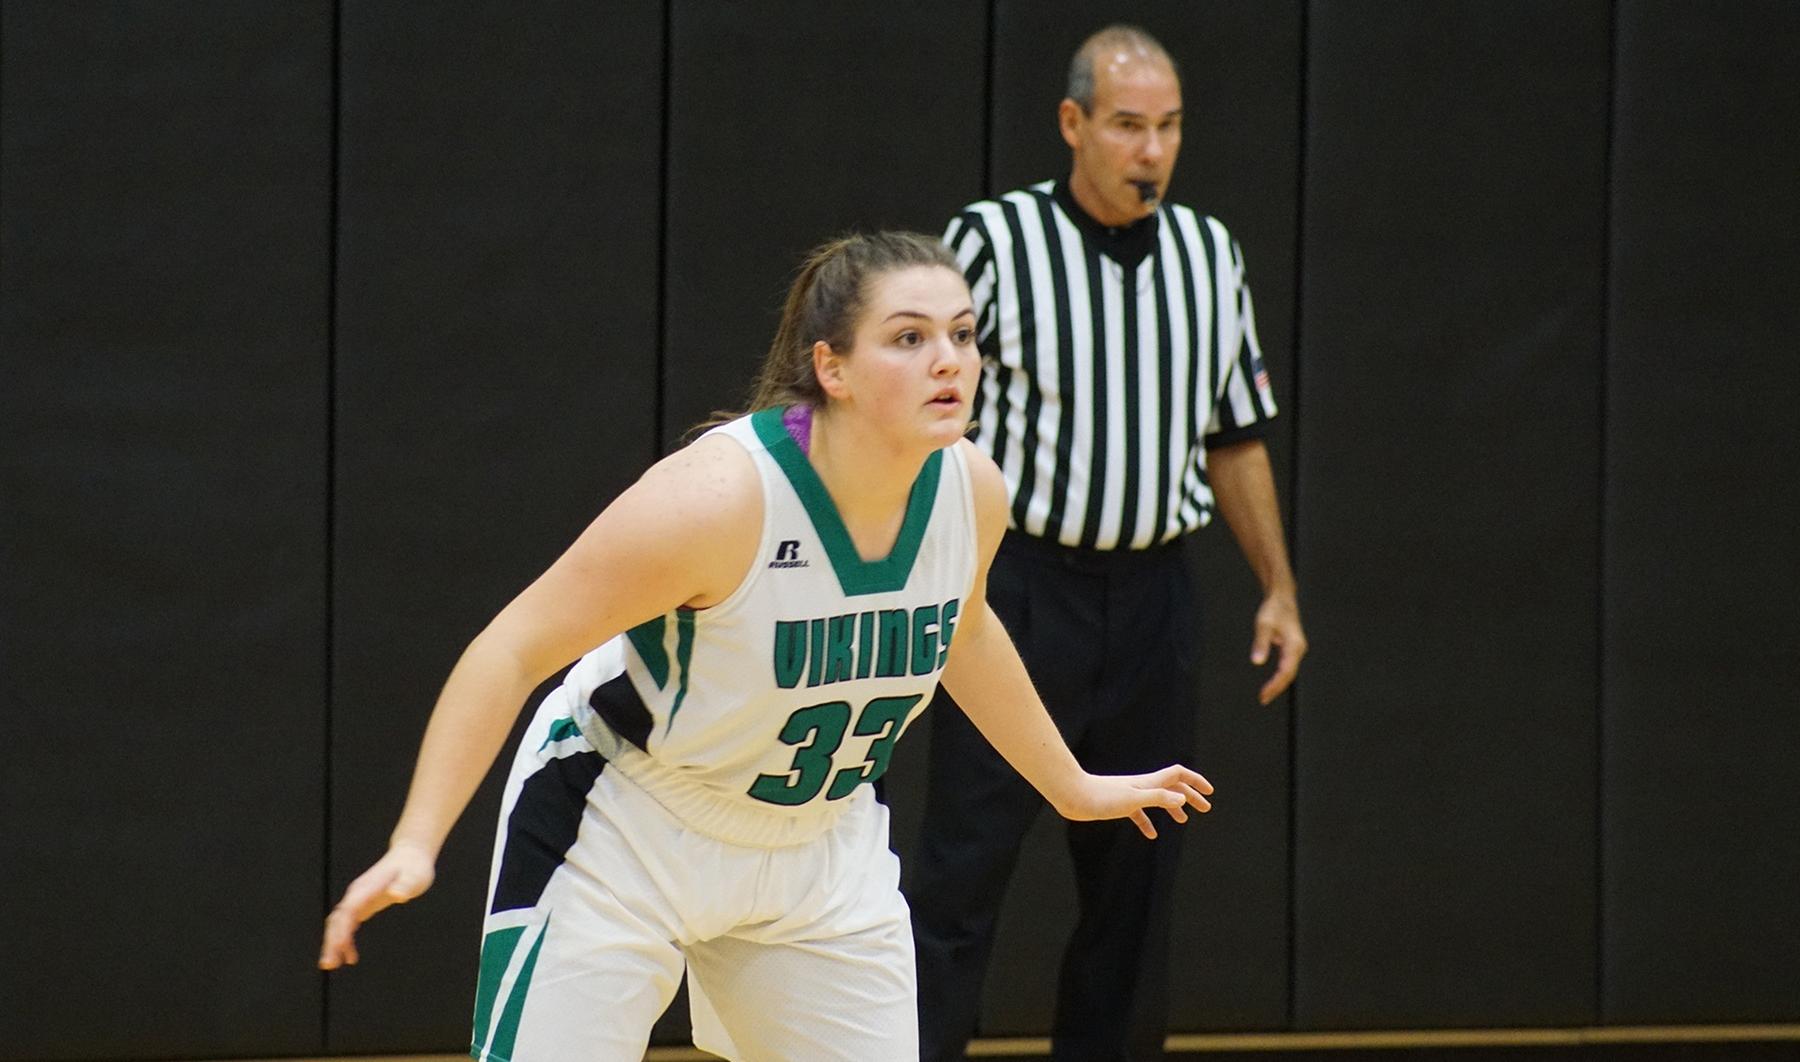 Clapman with 17 Rebounds, Williams Scores 15 in OCC's 71-29 Loss to Bergen CC